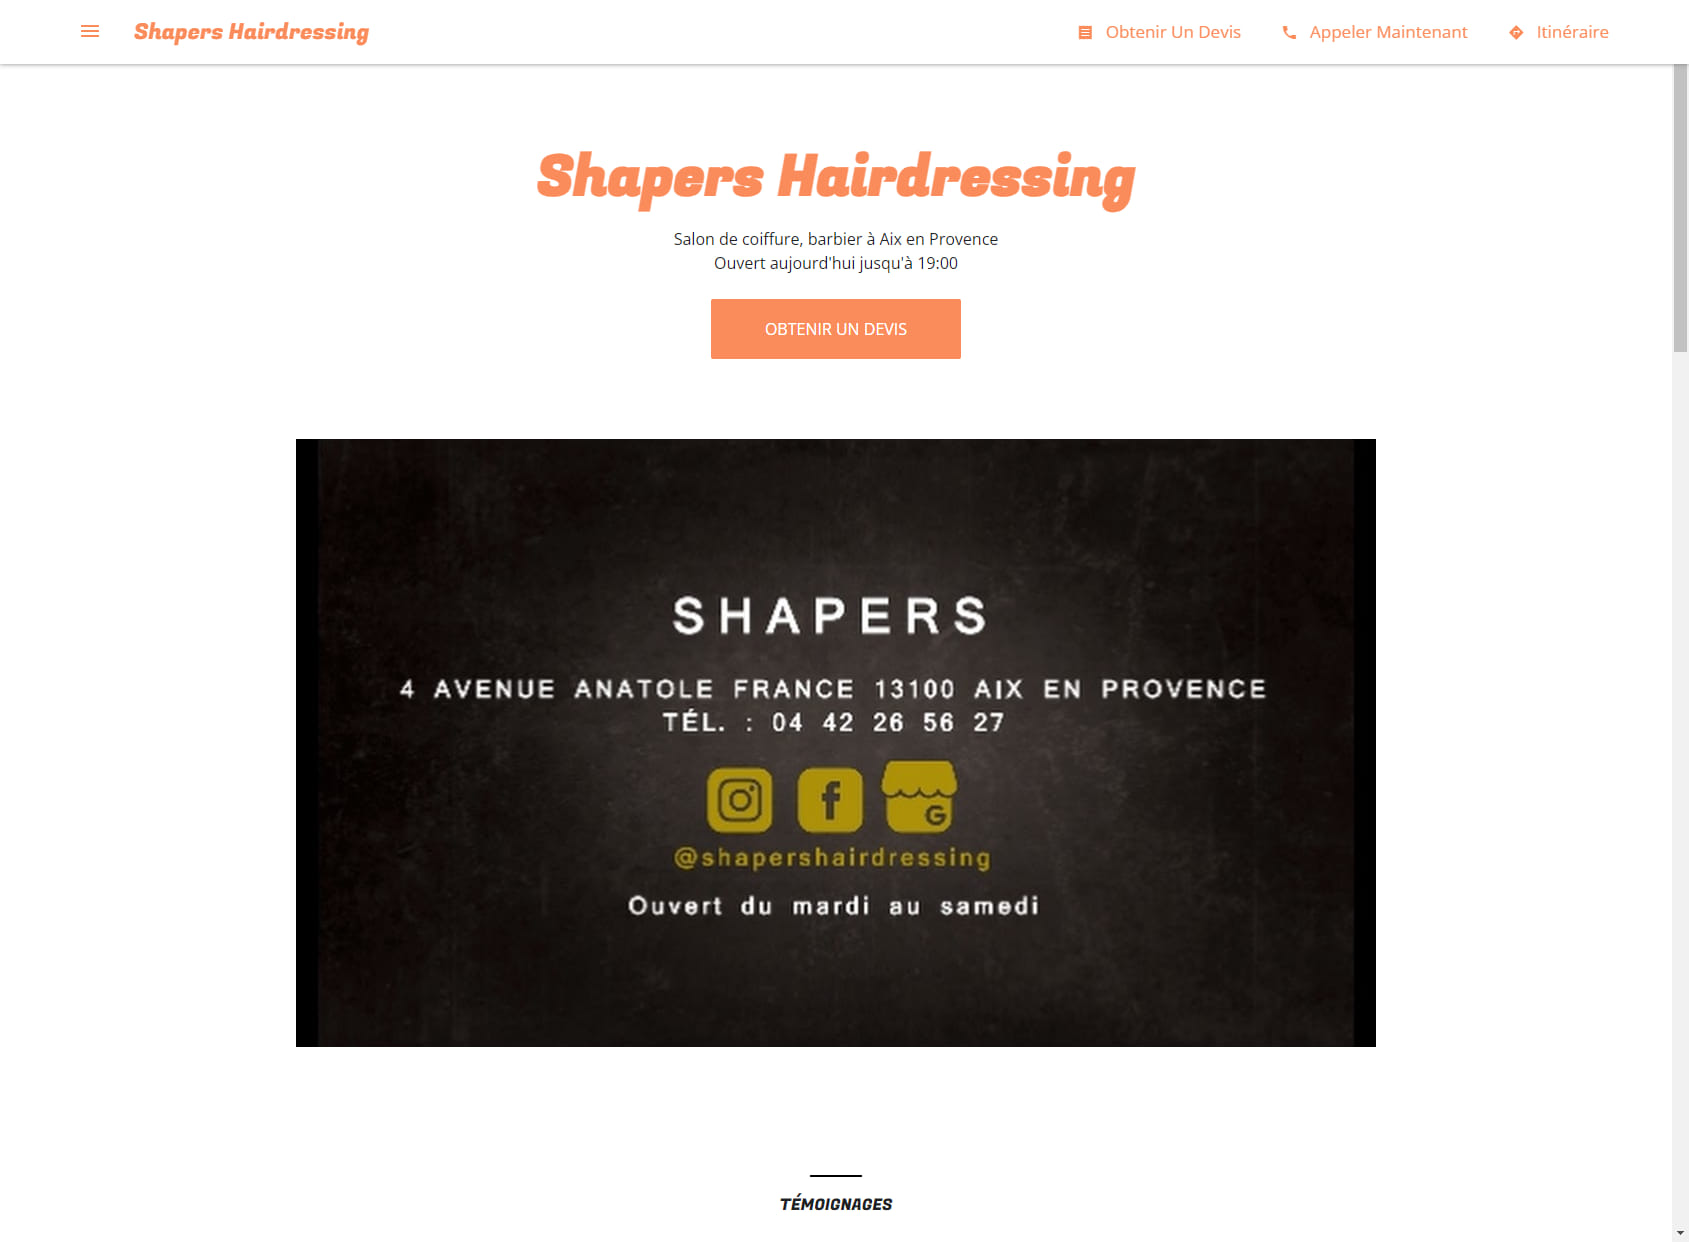 Shapers Hairdressing